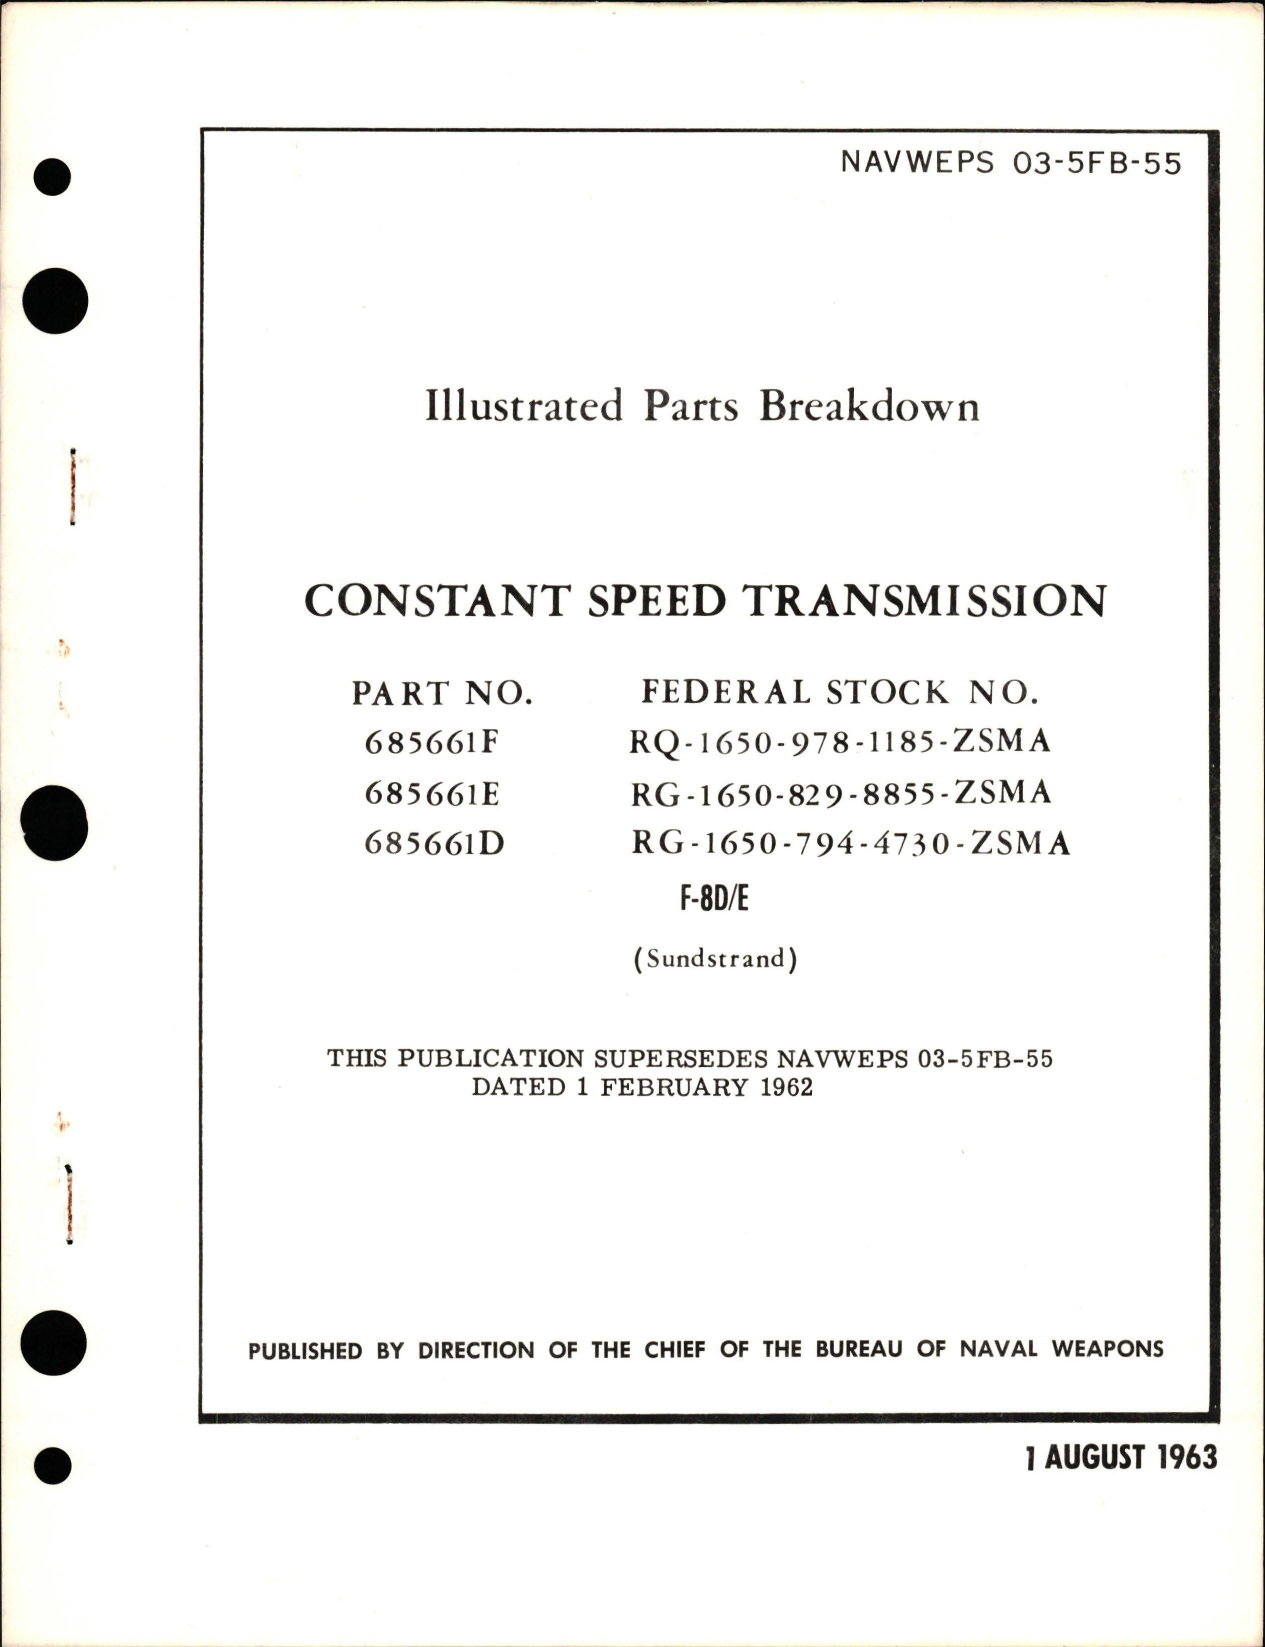 Sample page 1 from AirCorps Library document: Illustrated Parts Breakdown for Constant Speed Transmission - Parts 685661F, 685661E, 685661D